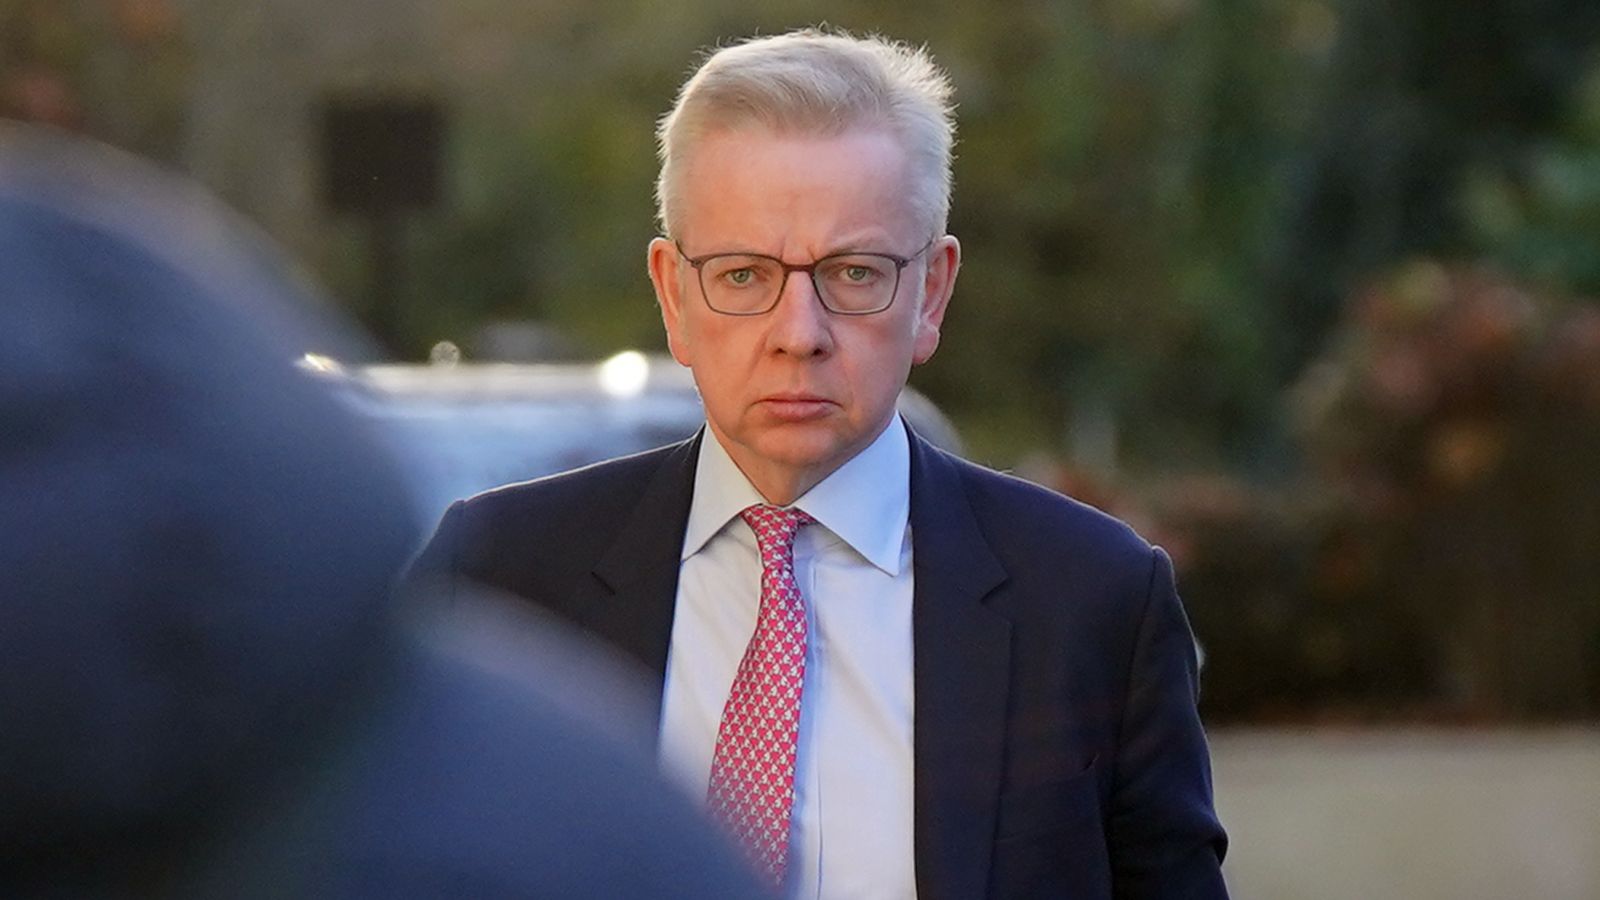 Government 'not contemplating' early election over Rwanda plan, says Michael Gove